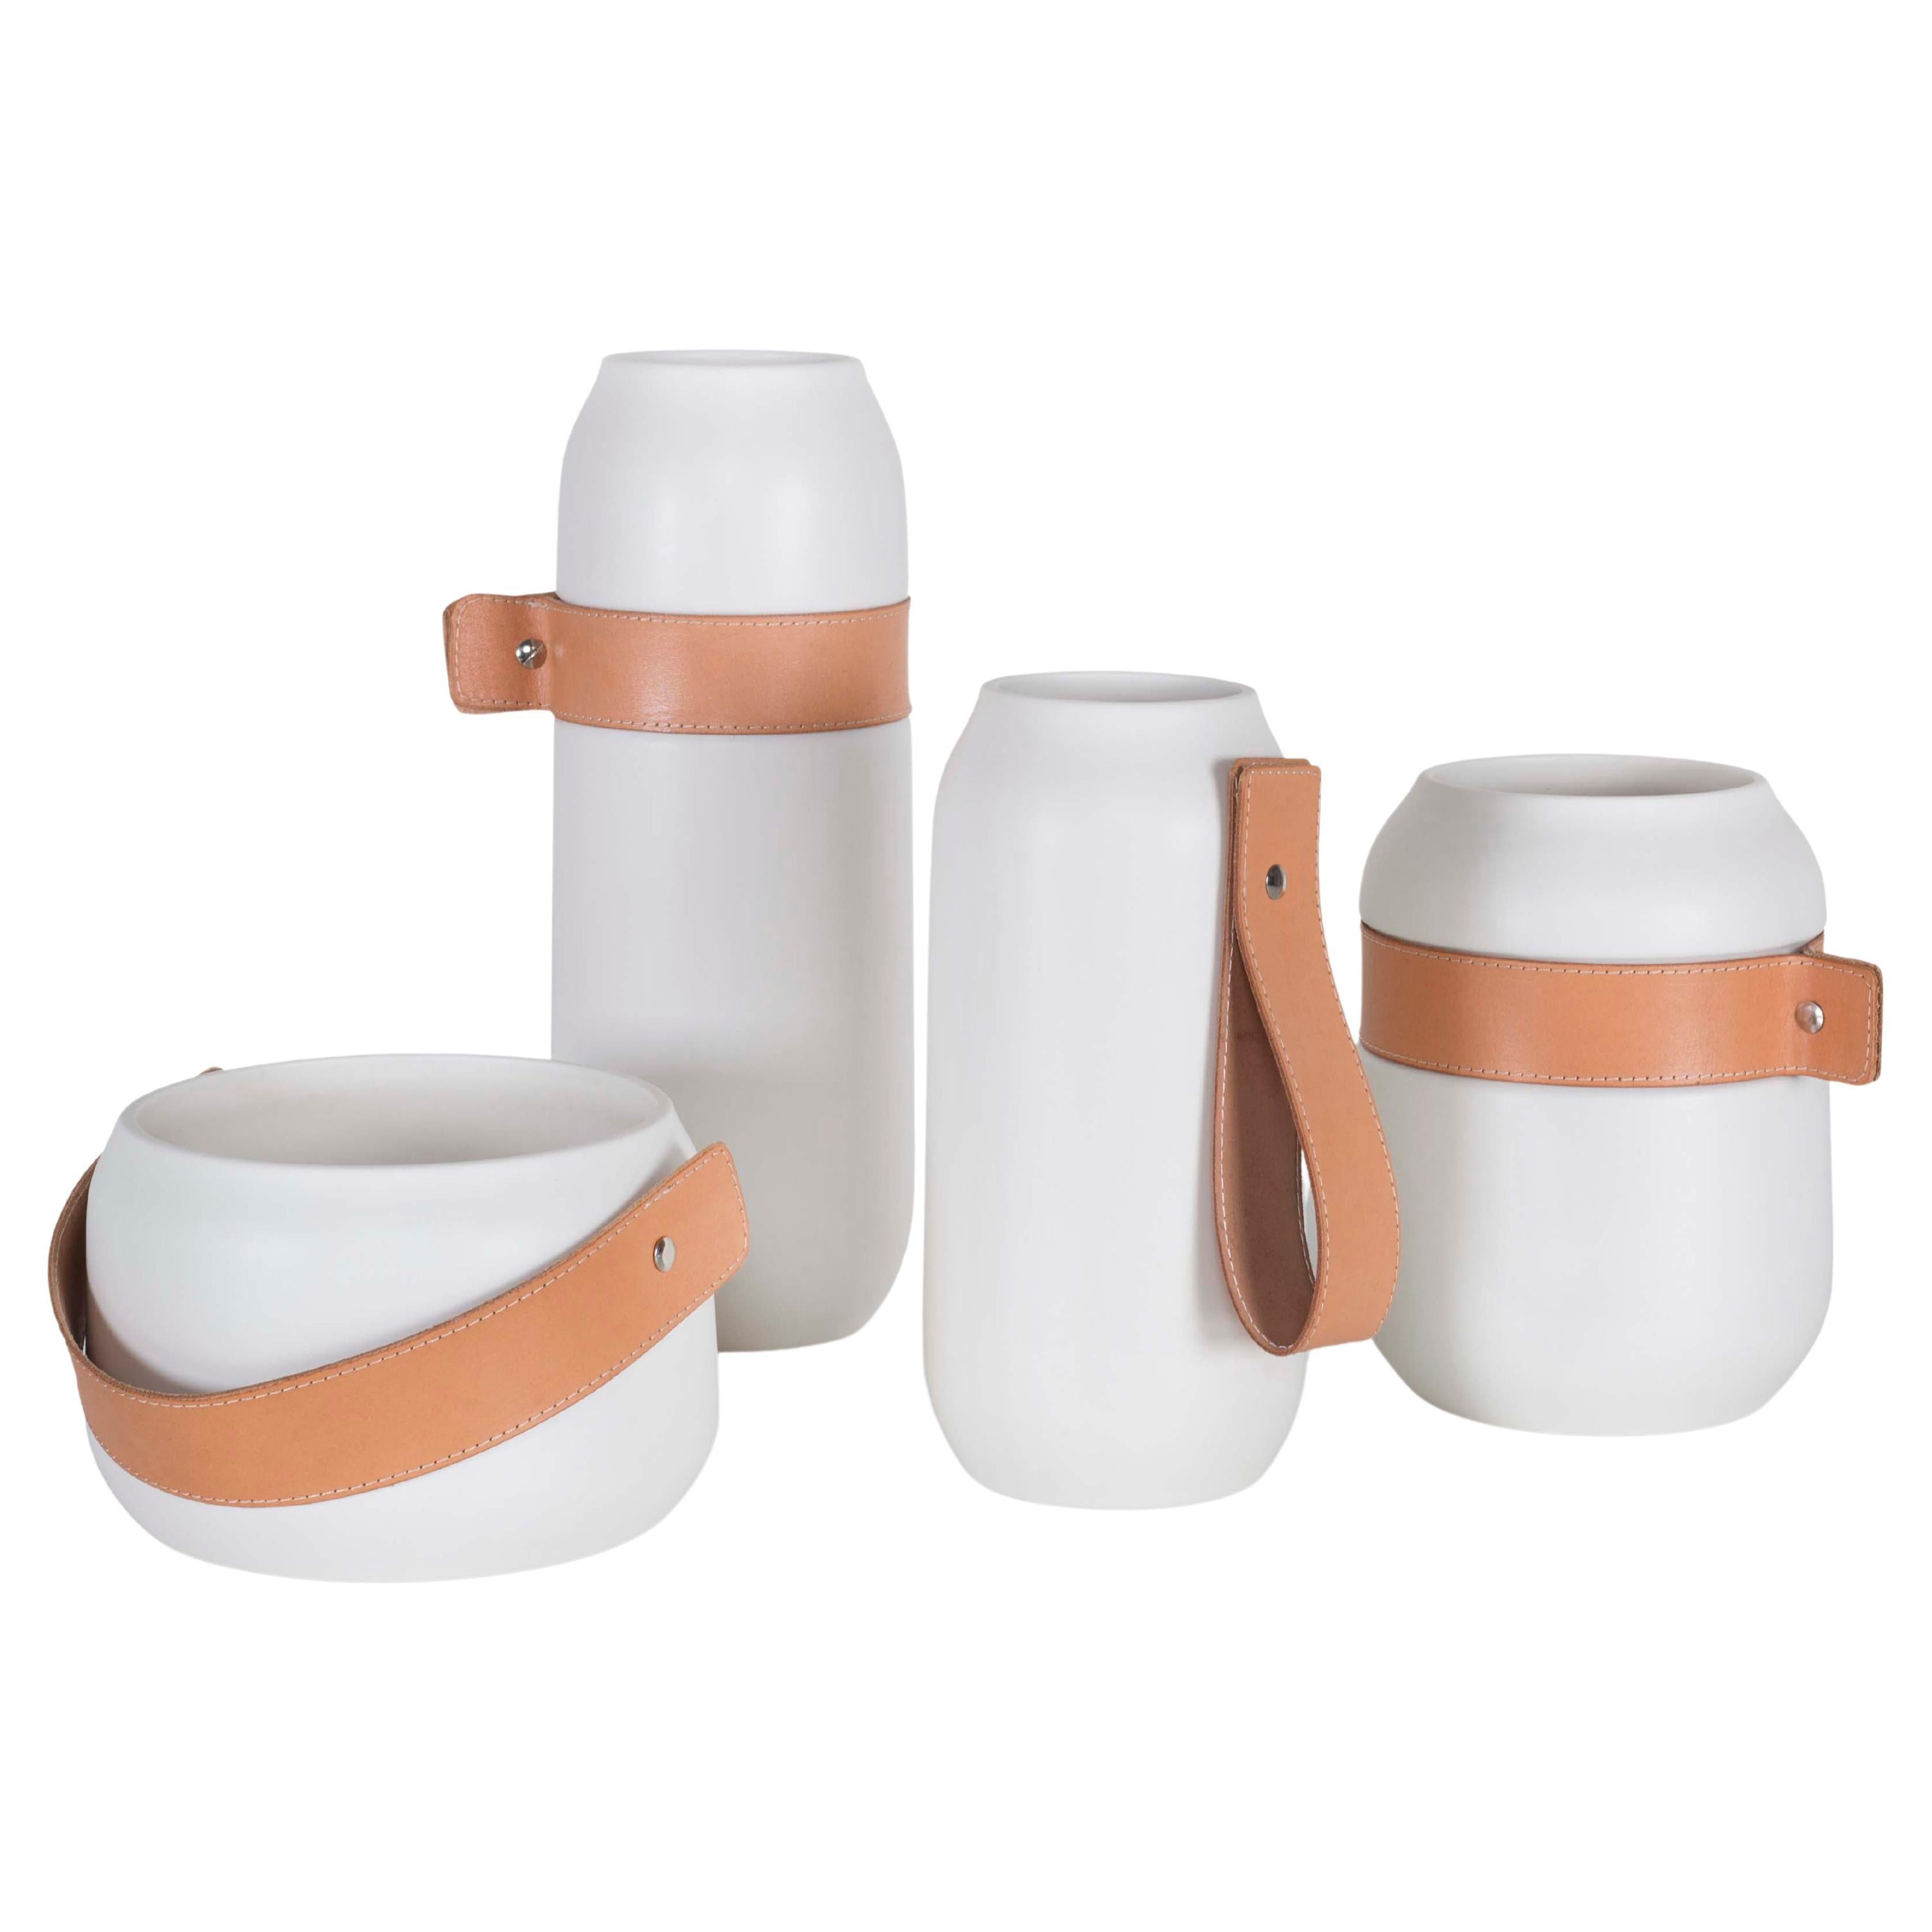 Set/4 Ceramic Vases w/ Leather, White, Handmade in Portugal by Lusitanus Home